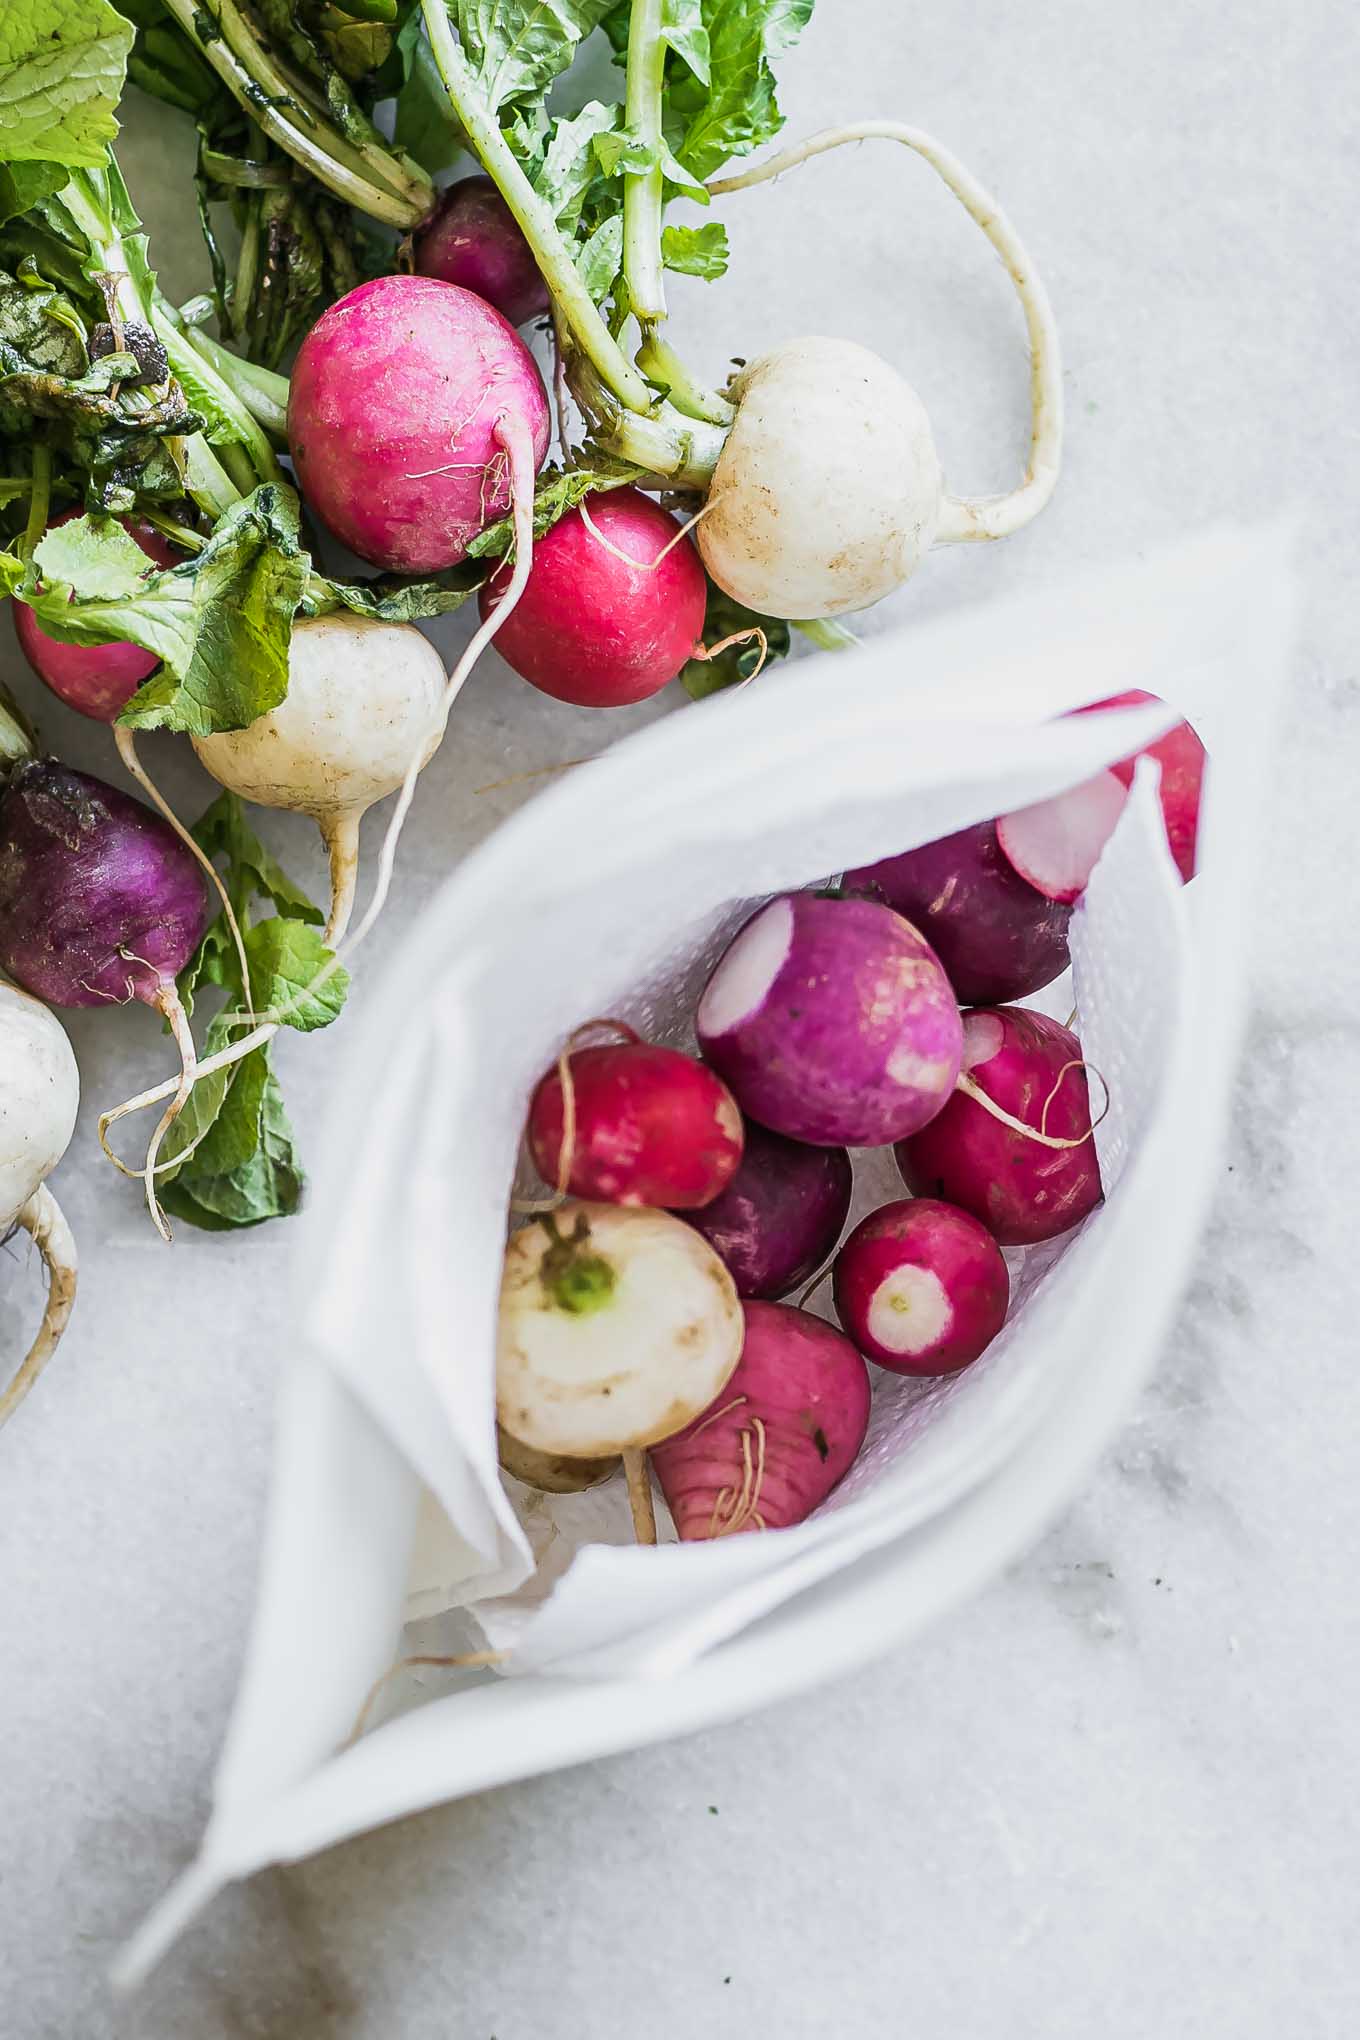 rainbow colored radishes on a white countertop